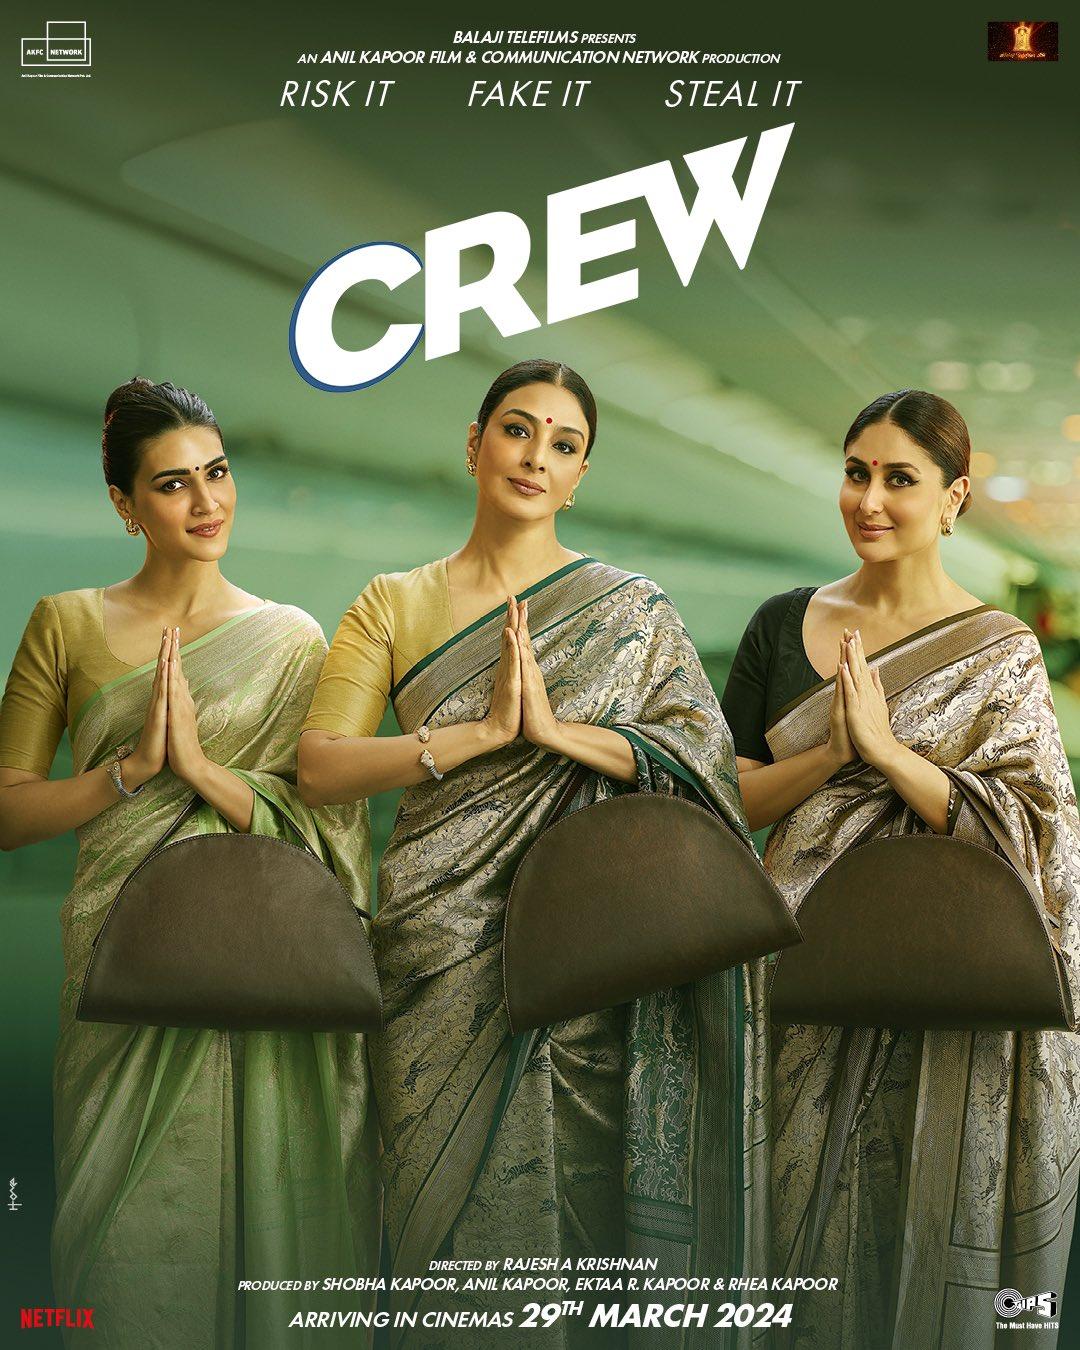 Crew (JioCinema) – May 24Crew stars Geeta Sethi (Tabu), Jasmine Kohli (Kareena Kapoor Khan), and Divya Rana (Kriti Sanon) as air hostesses who find themselves entangled in a high-risk heist to solve their financial woes. Balancing glamour, sass, and sisterhood, the trio recalibrate their plans after a brush with the authorities, pulling off a never-seen-before heist that promises to keep viewers on the edge of their seats.